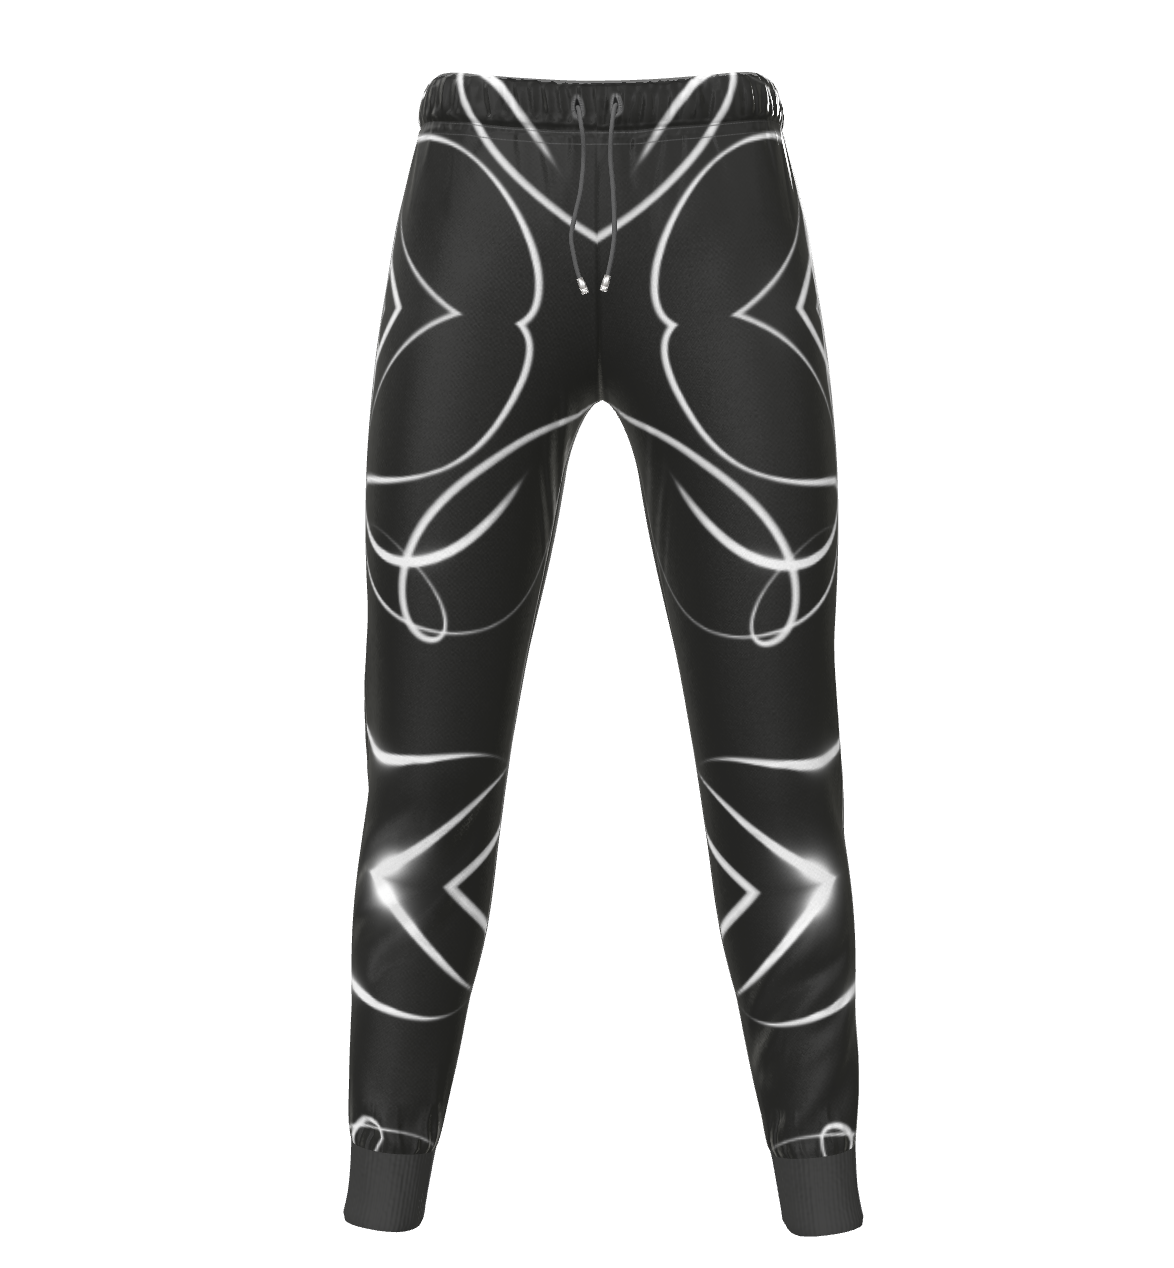 UNTITLED x Indira Cesarine "Lumière" Series Black and White Kaleidoscopic Women's Tracksuit Bottoms - Limited Edition